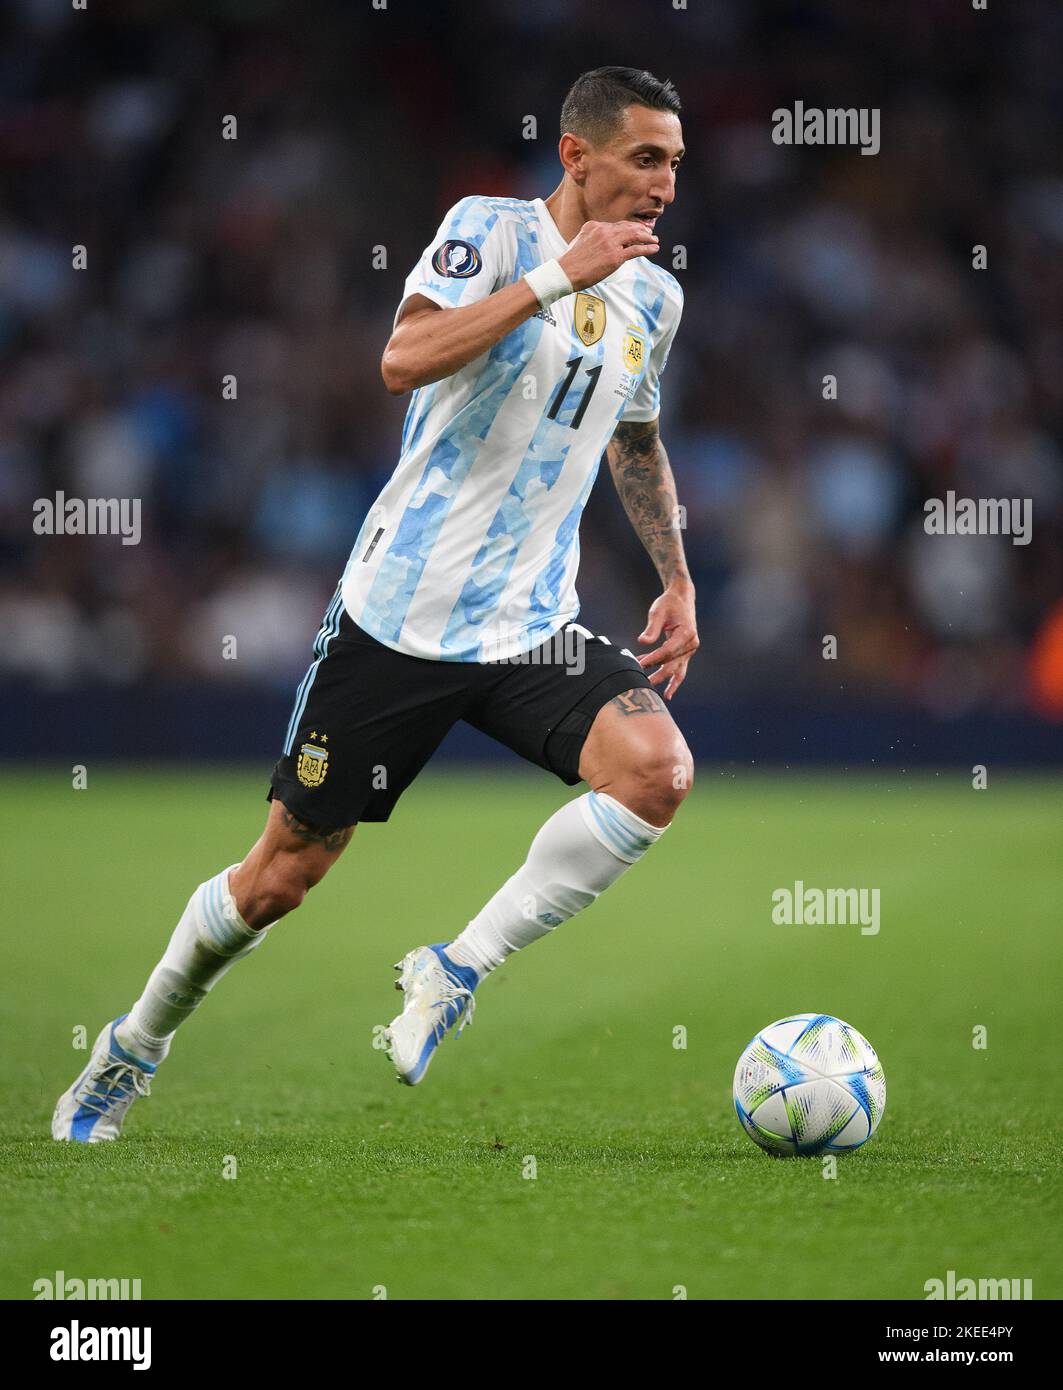 01 Jun 2022 - Italy v Argentina - Finalissima 2022 - Wembley Stadium  Argentina's Angel Di Maria during the match against Italy at Wembley Stadium. Picture Credit : © Mark Pain / Alamy Stock Photo